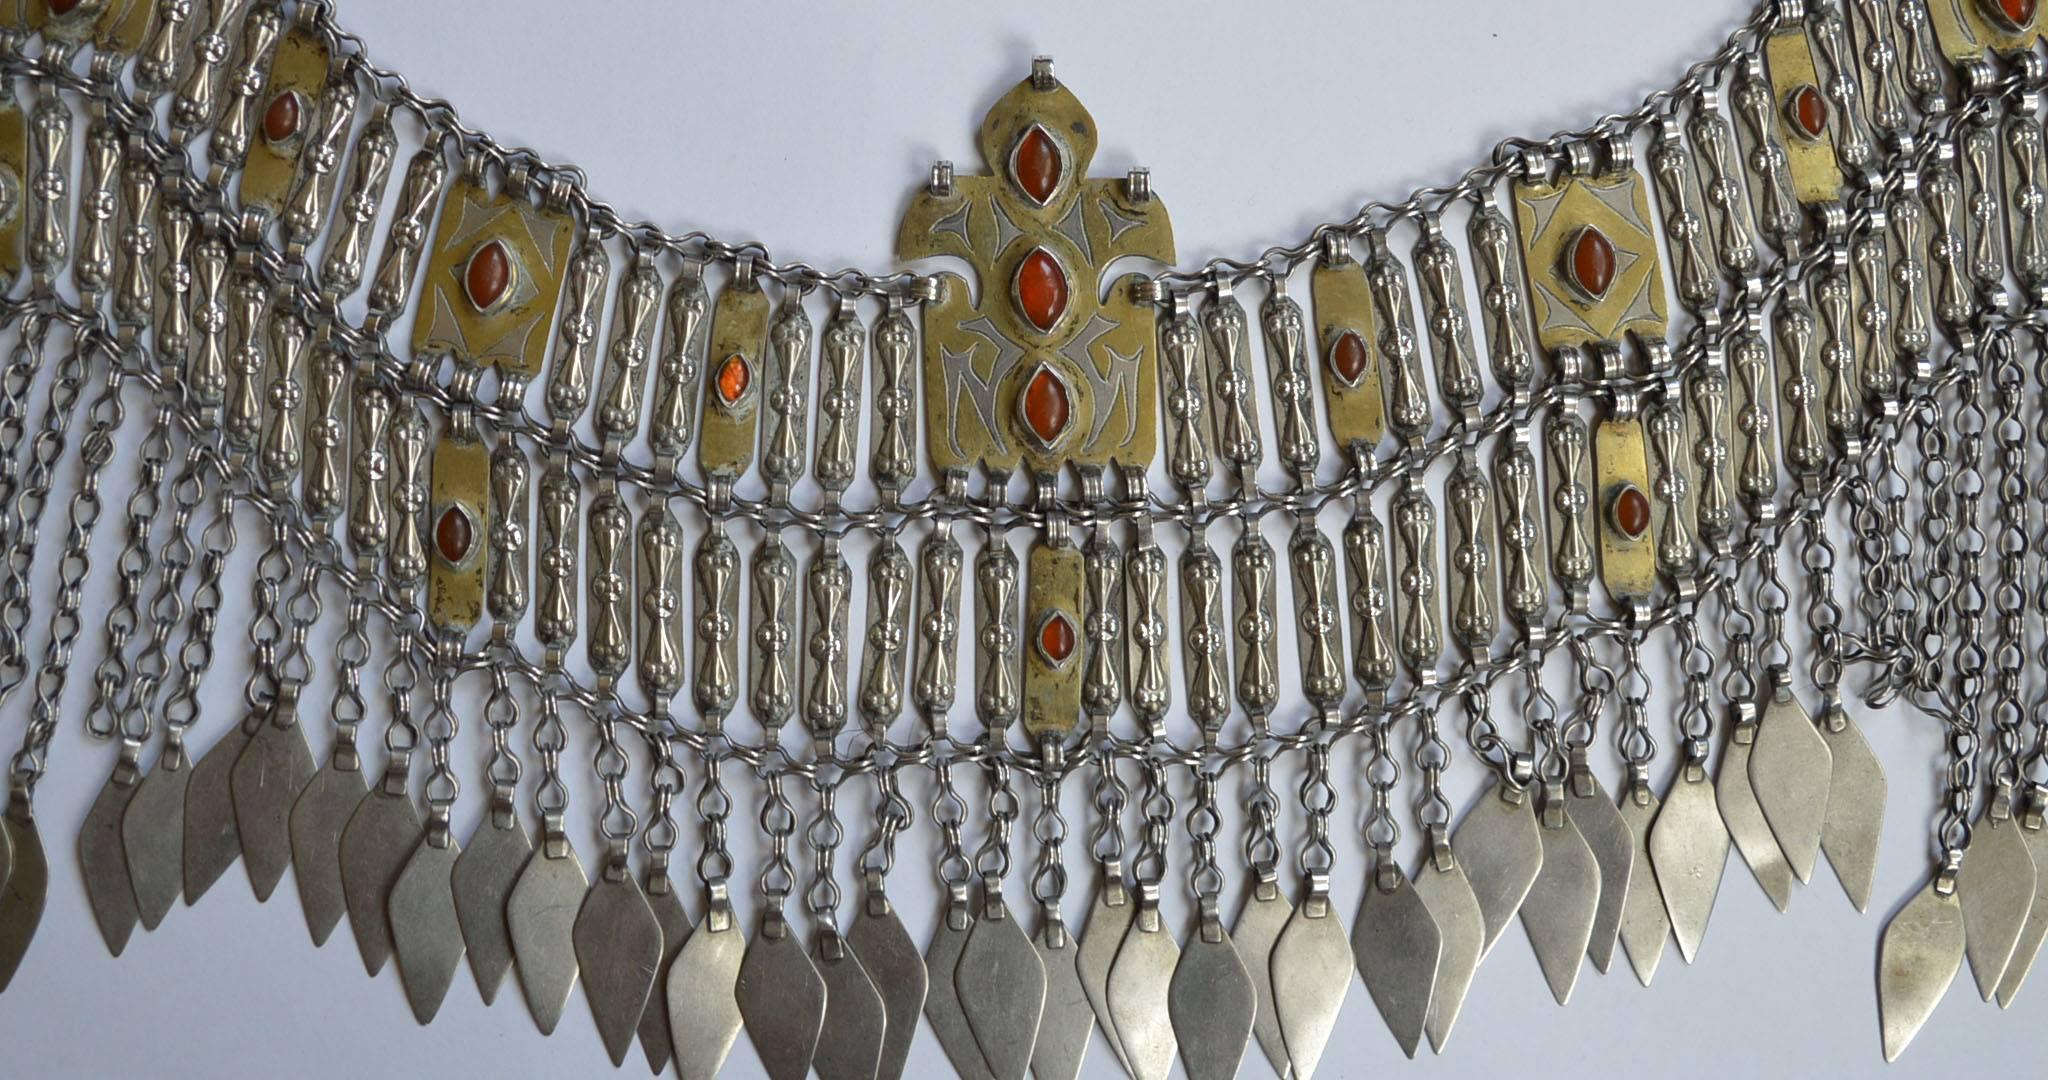 Large antique central Asian Turkmenistan tribal silver gilt breast piece necklace
A very high quality pure grade silver and gilt with agate 
Nice collectible or wearable antique piece in fine condition, requires cord or chain
Period early 20th